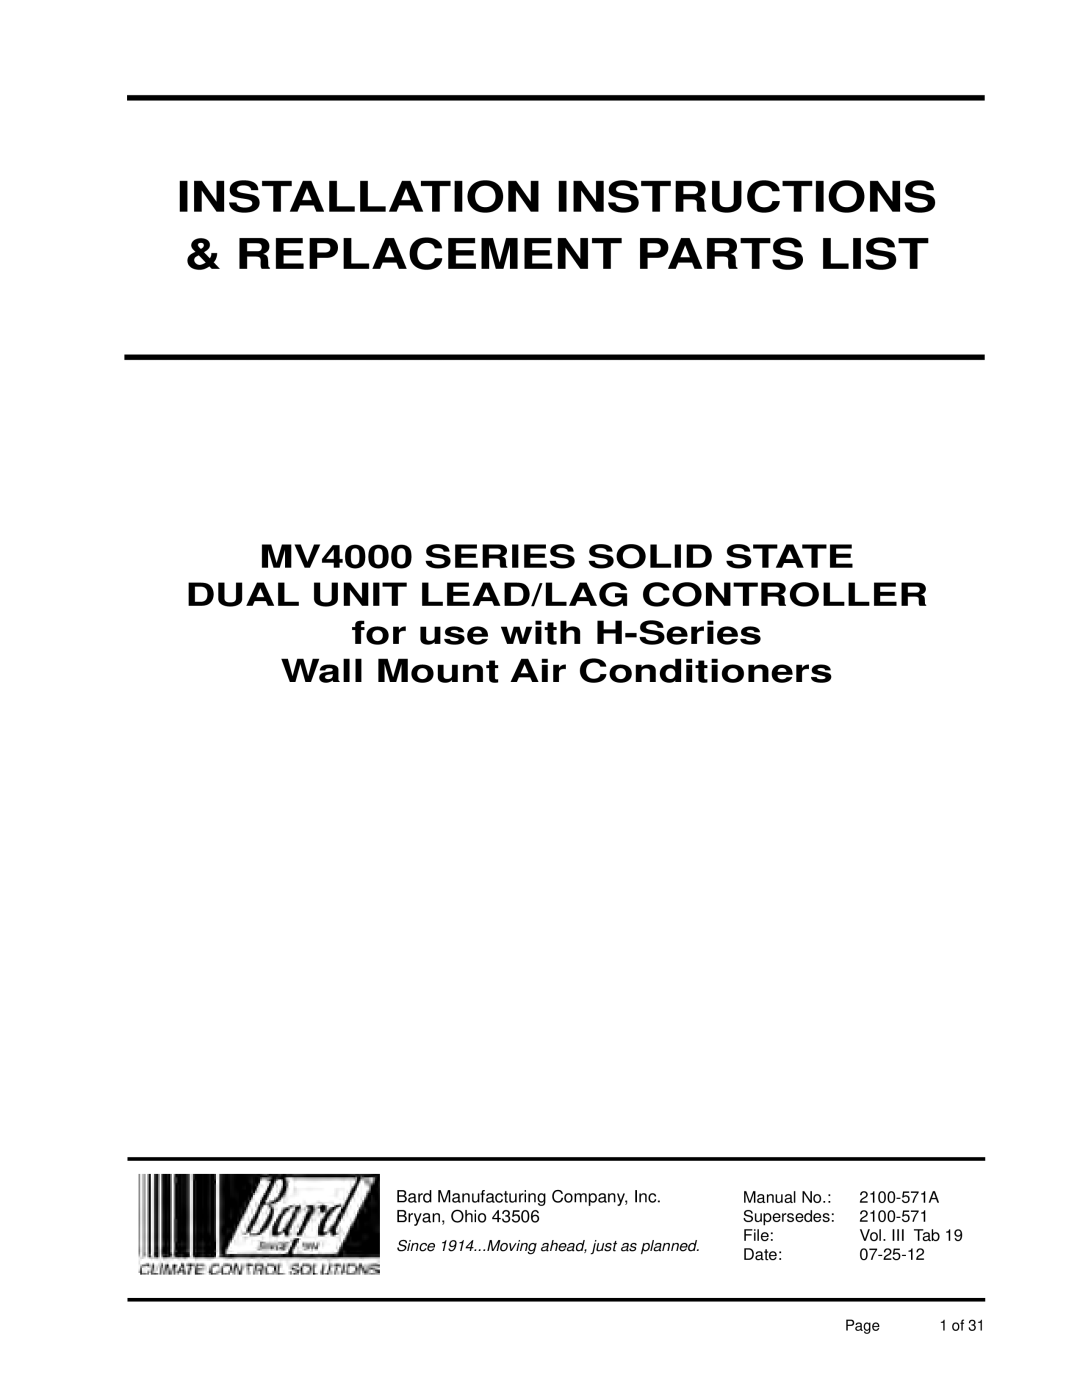 Bard MV4000 installation instructions Installation Instructions & replacement parts list 